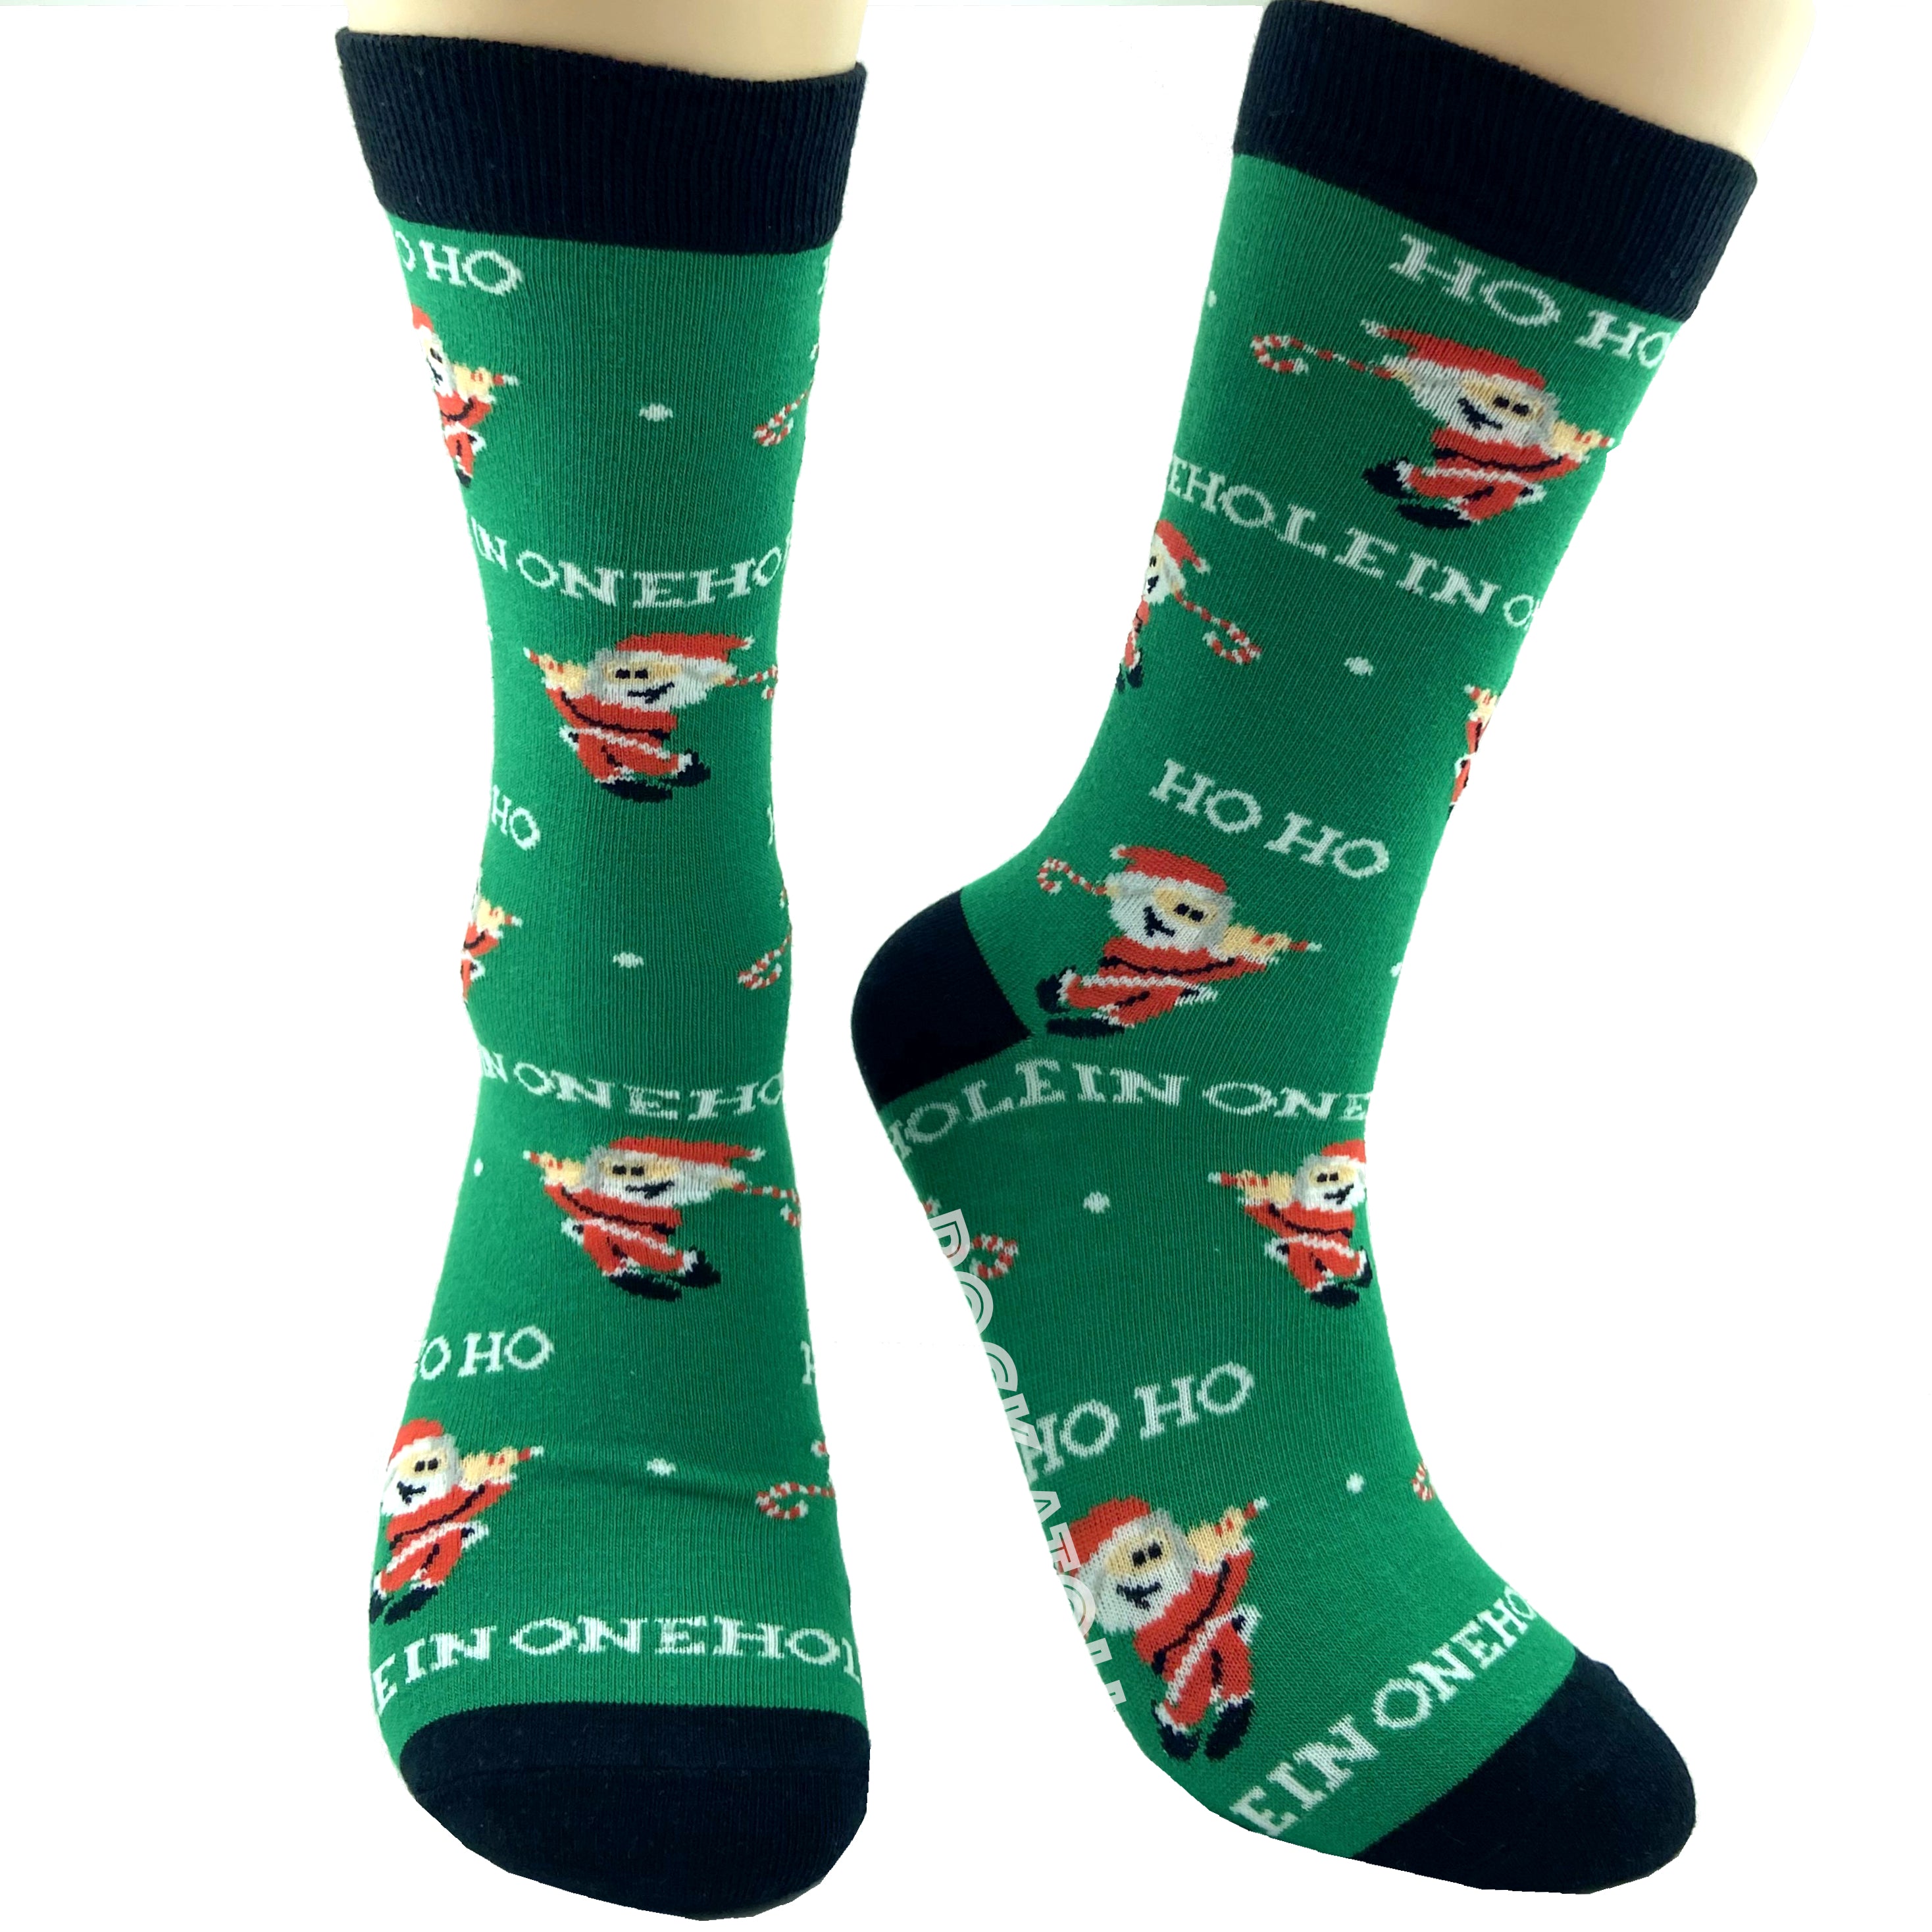 Unisex Santas Playing Golf Patterned Hole In One Novelty Dress Socks